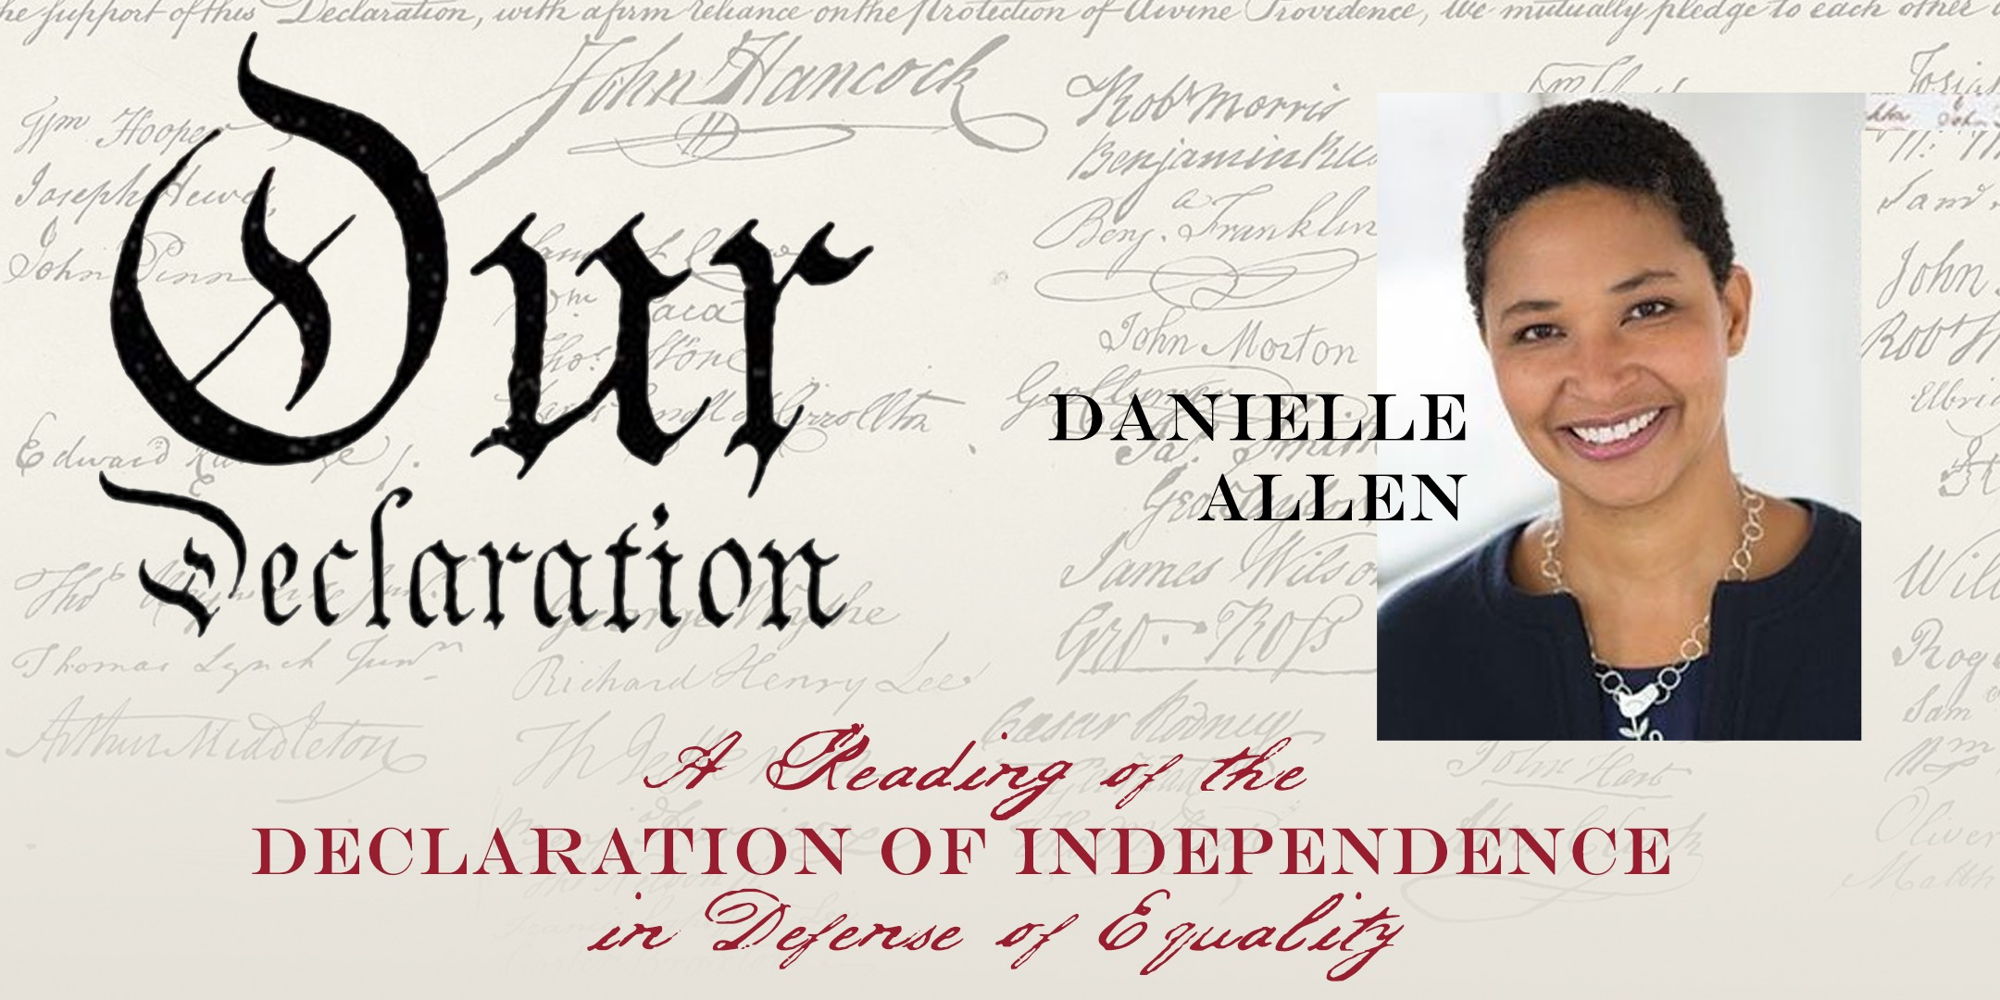 "Our Declaration: A Reading of the Declaration of Independence in Defense of Equality" with Dr. Danielle Allen promotional image